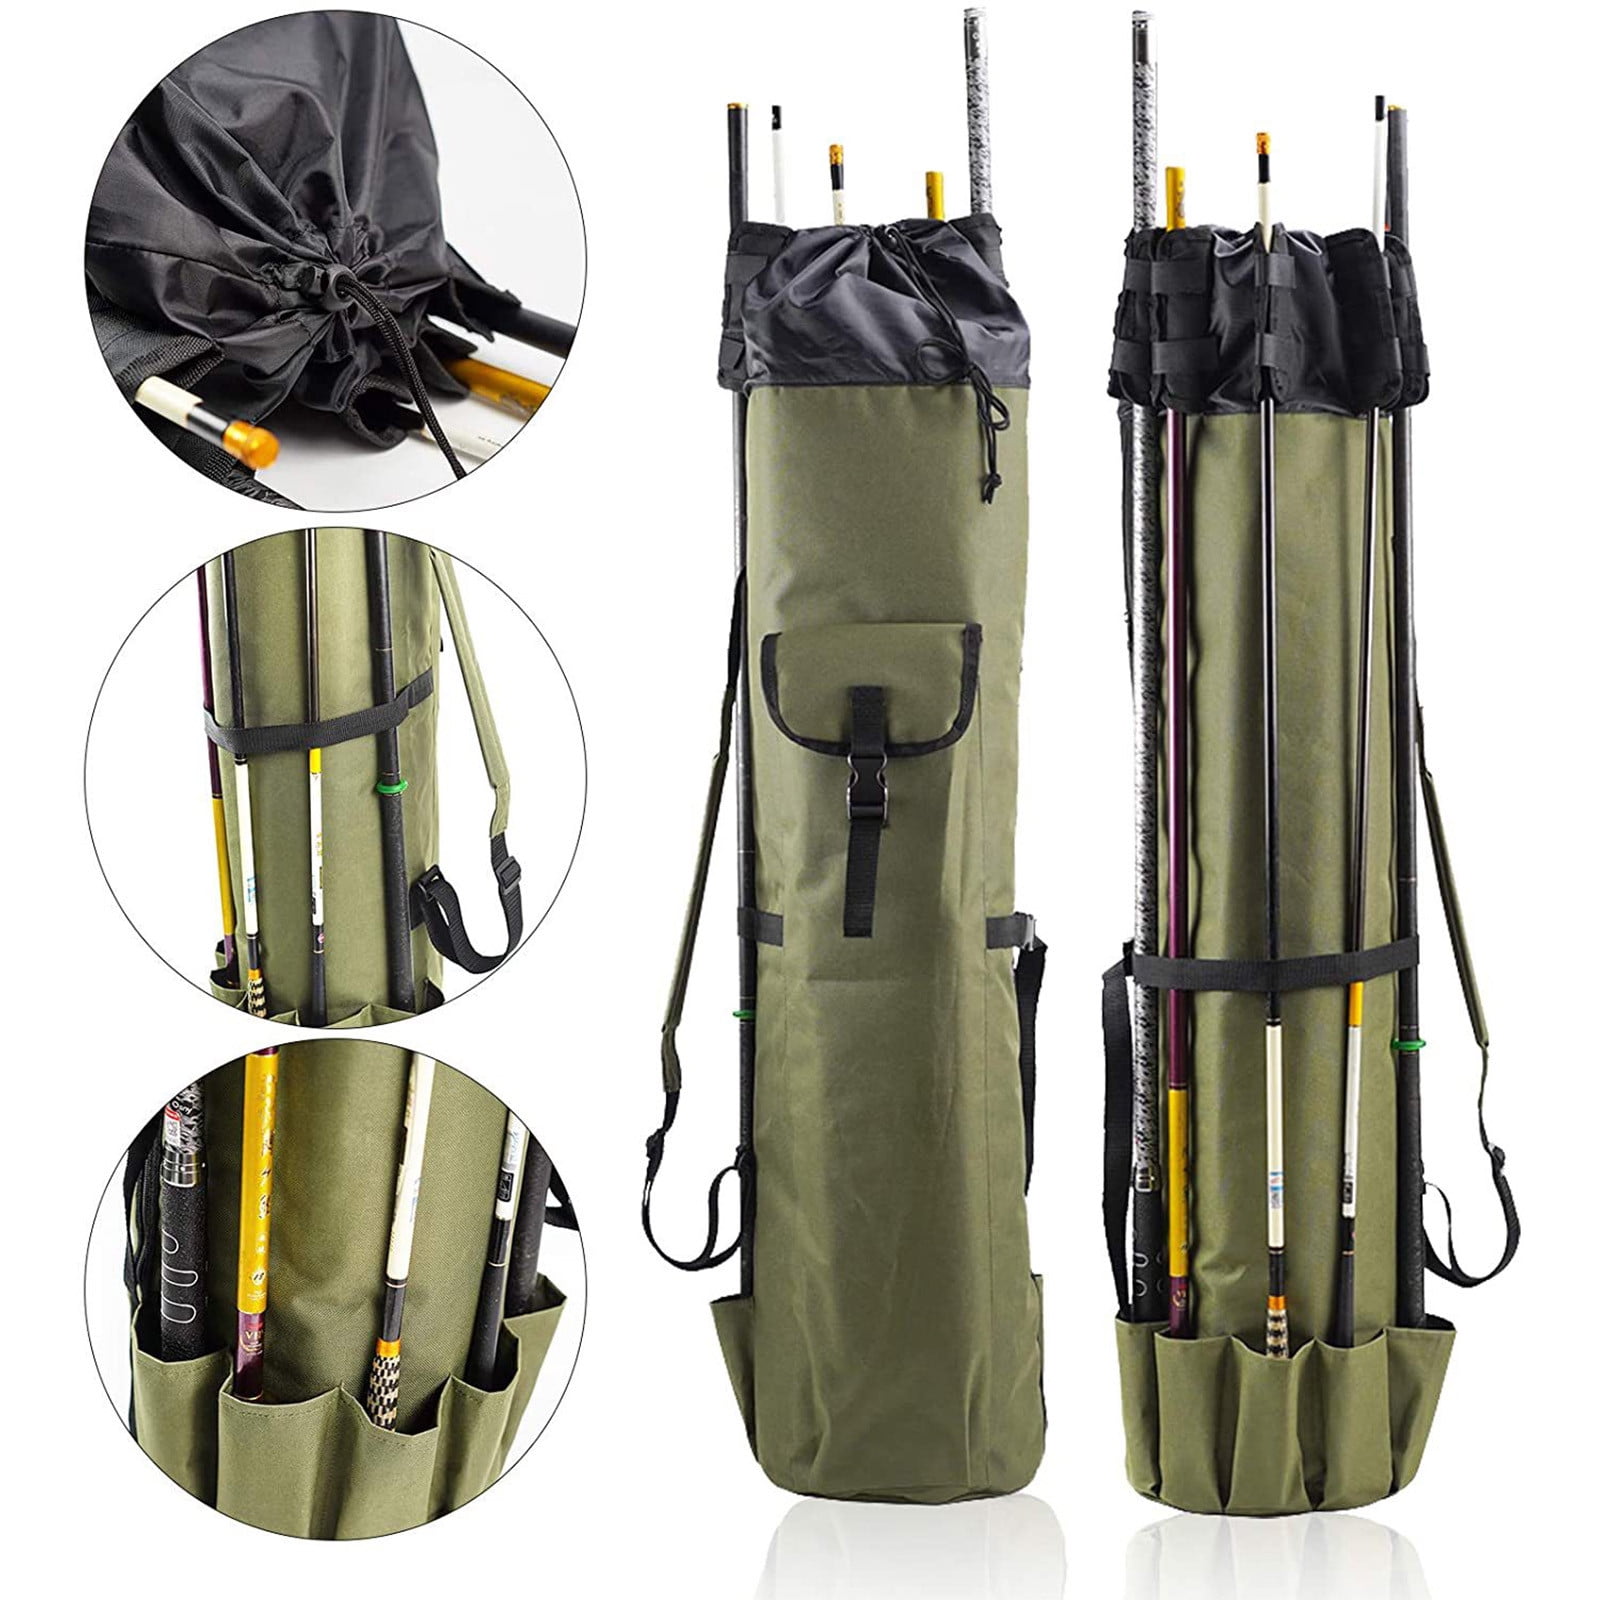 Ikohbadg Fishing Pole Storage Bag with 5 Rod Capacity - Lightweight Travel  Case and Tackle Box for Fishing Reels - Multifunctional Stand Included 